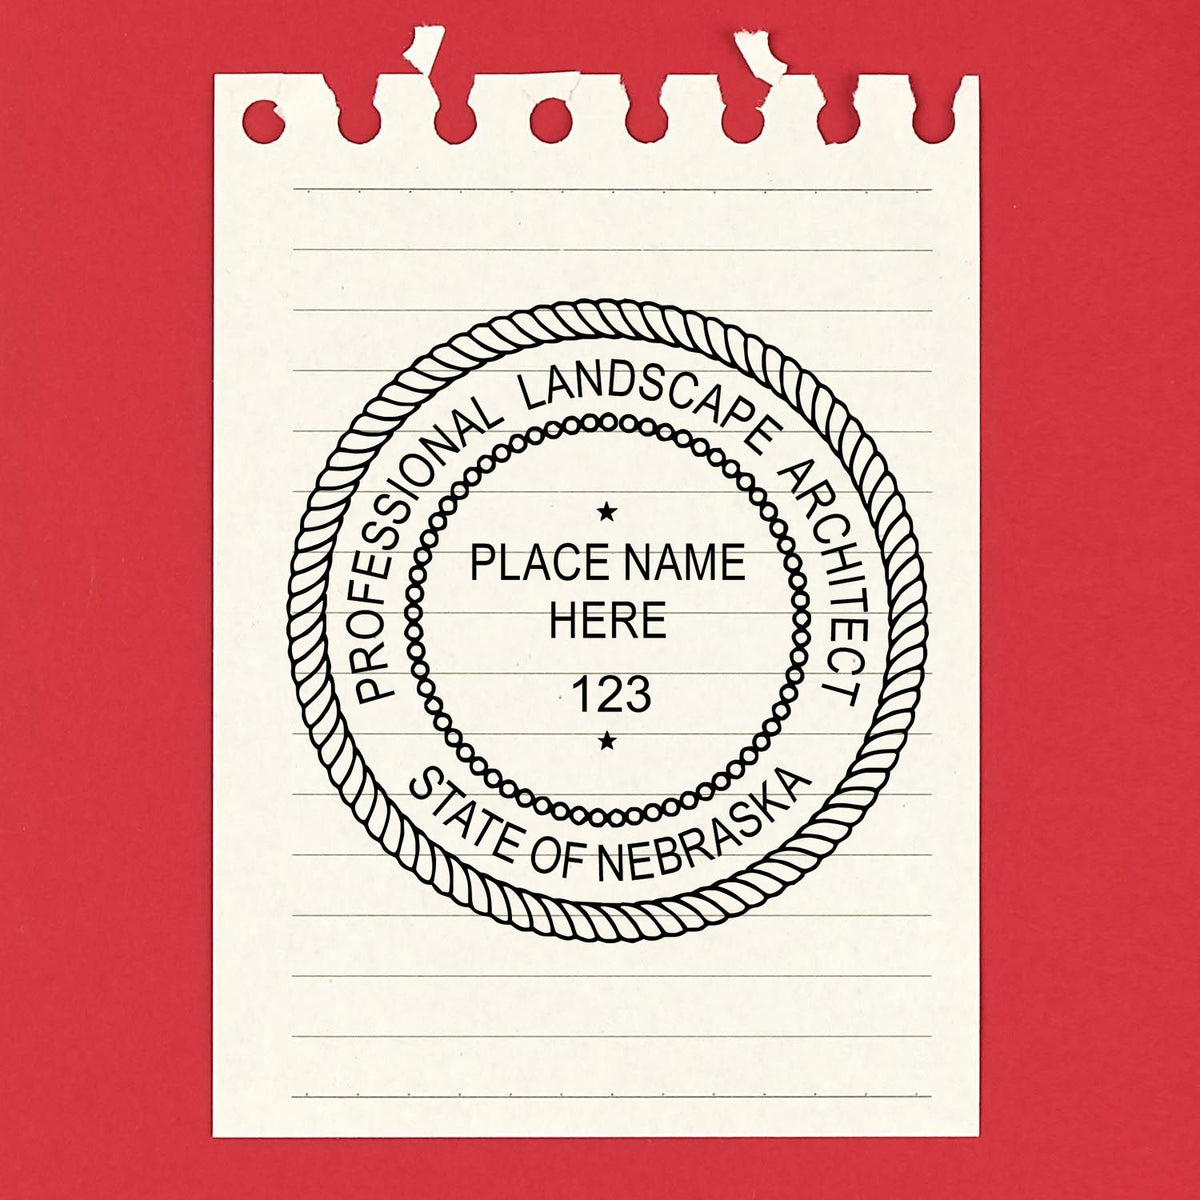 This paper is stamped with a sample imprint of the Slim Pre-Inked Nebraska Landscape Architect Seal Stamp, signifying its quality and reliability.